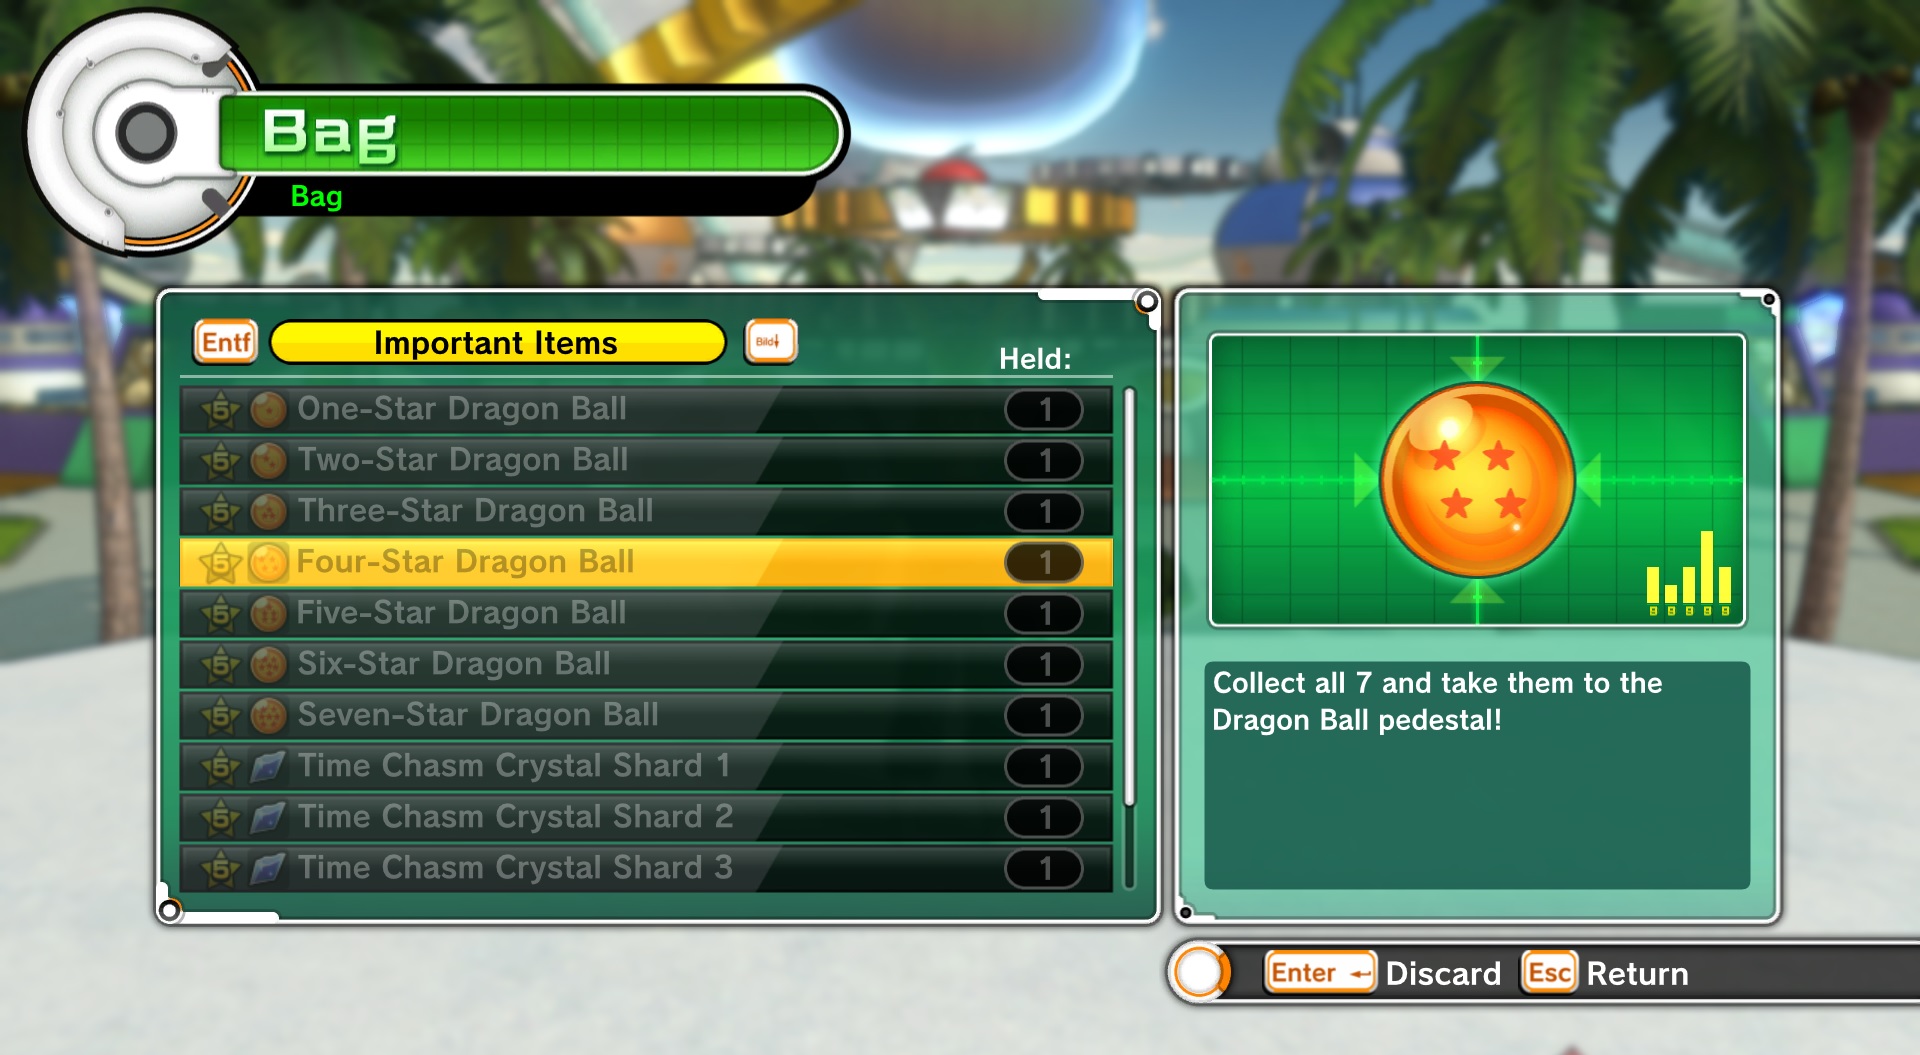 How to collect all 7 Dragon Balls in Xenoverse 2?